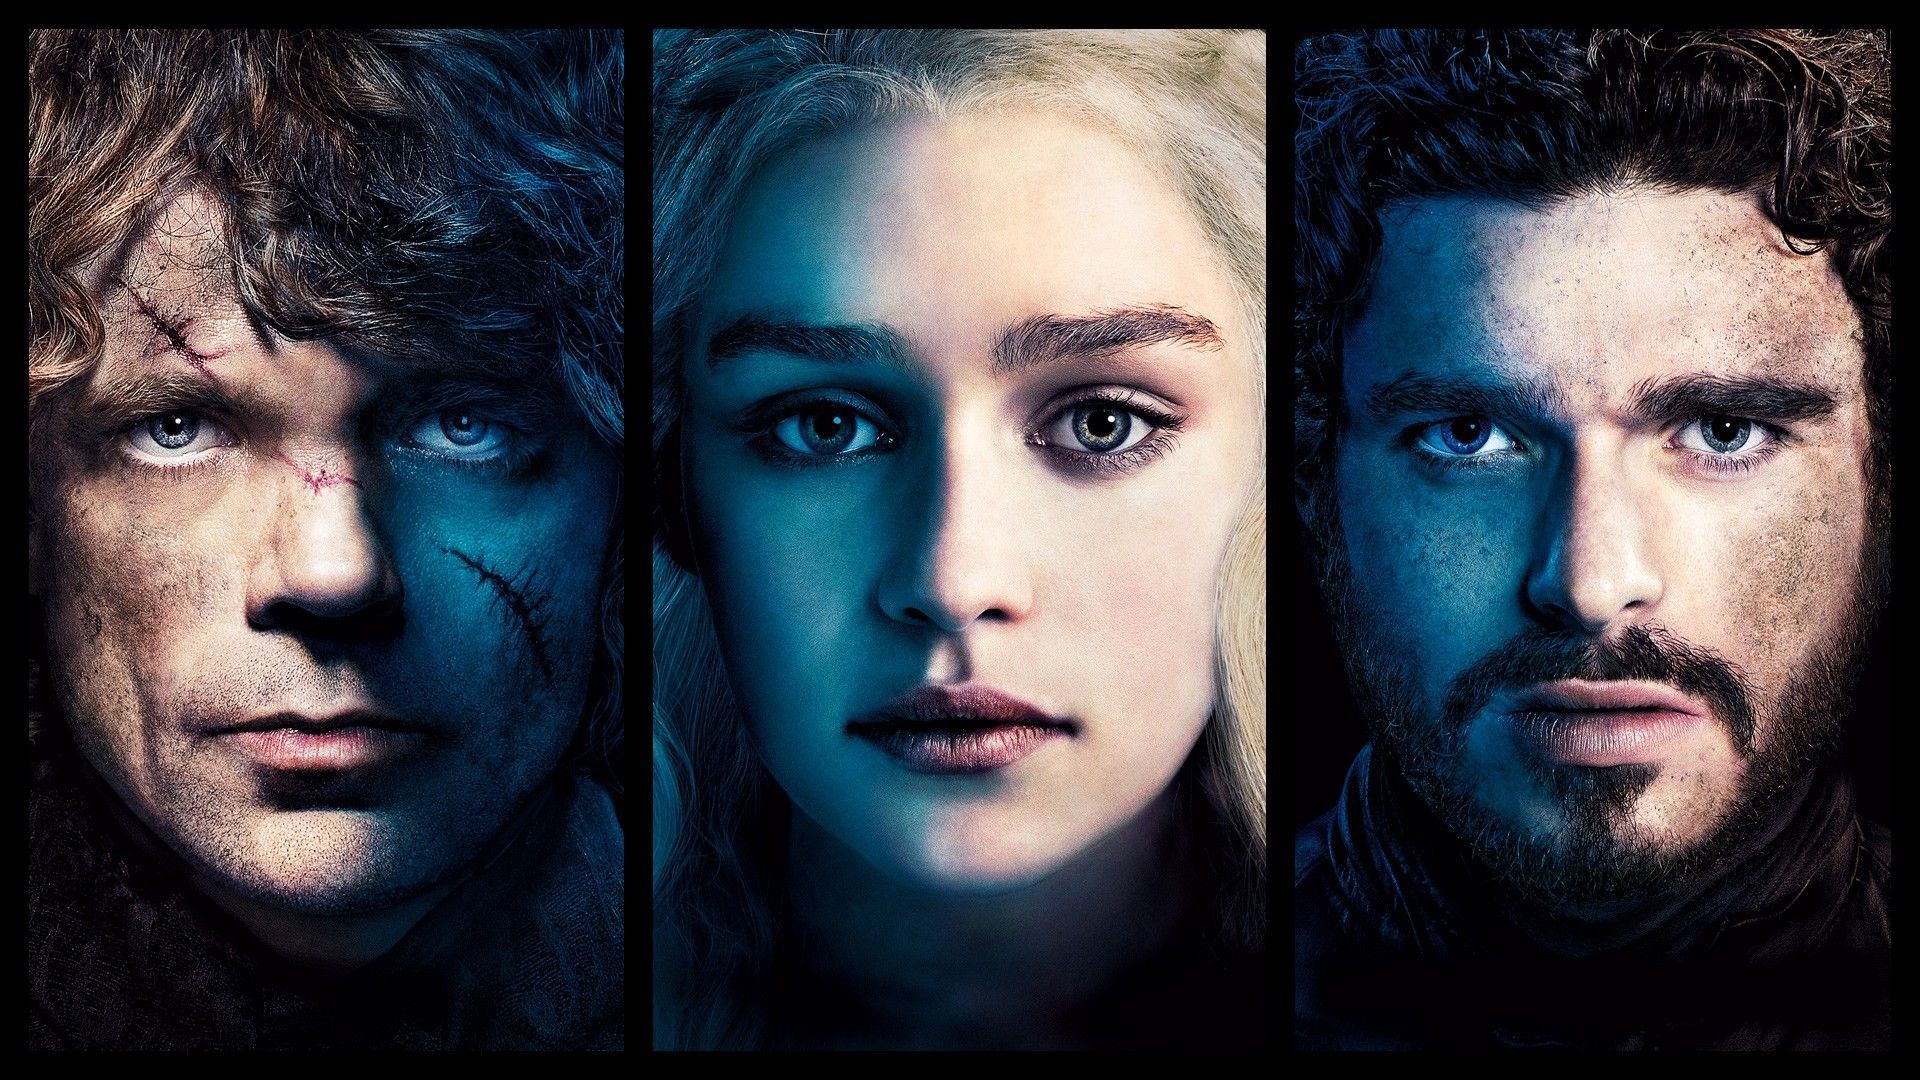 1920x1080 Tyrion, Daenerys and Robb Stark - Game of Thrones HD Wallpaper 